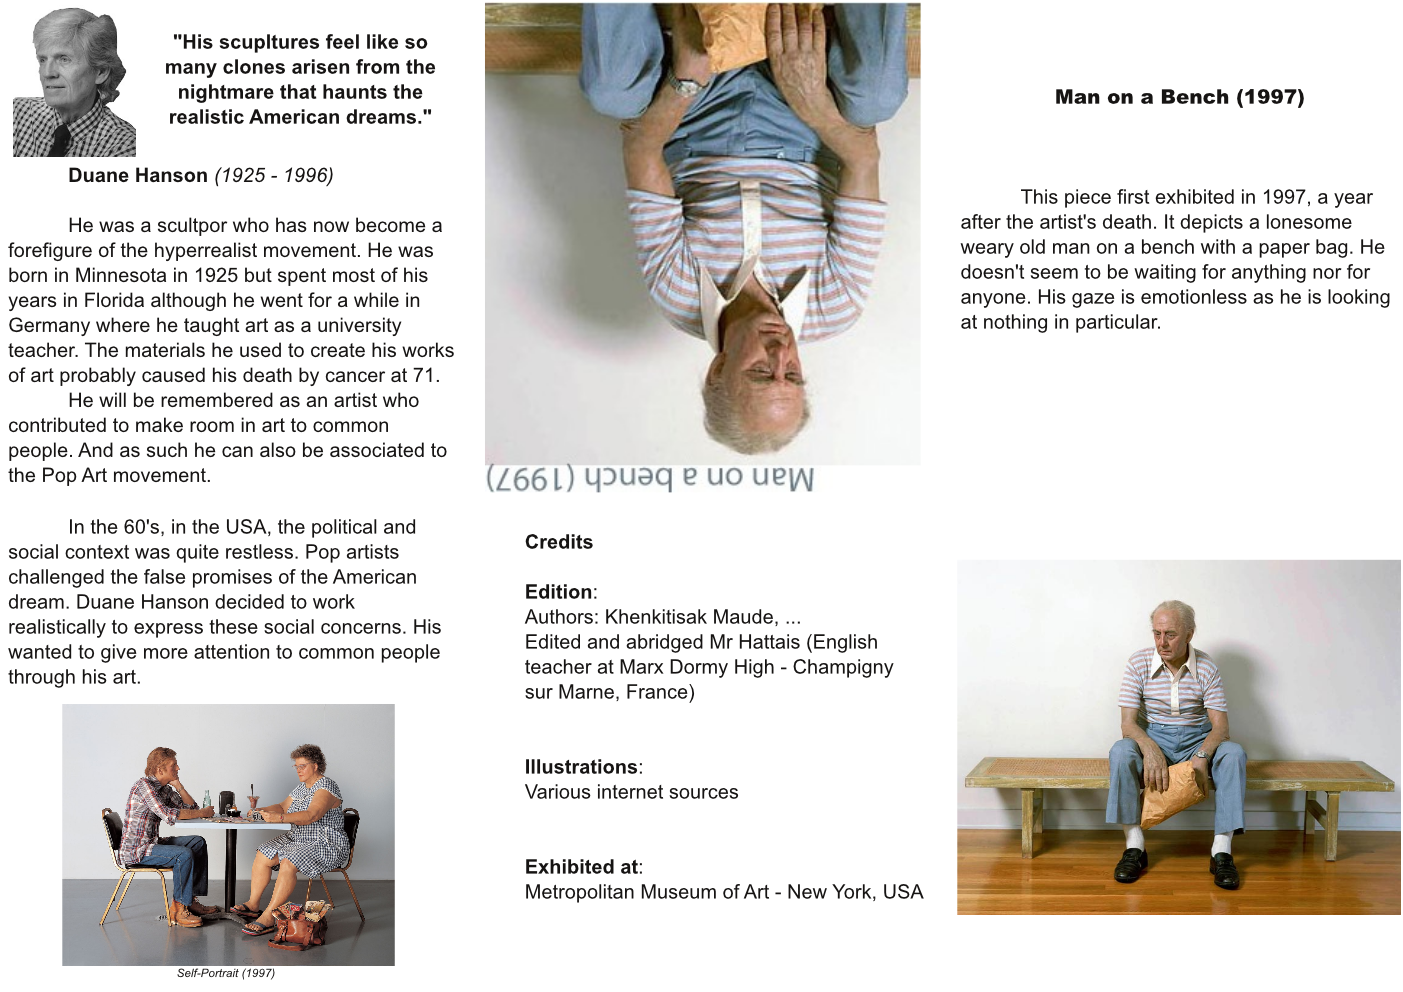 http://ddata.over-blog.com/3/18/86/31/1ere/Art-Exhibition/Hyper-Realism/Man-on-a-bench/brochure-man-on-a-bench---recto-page001.png